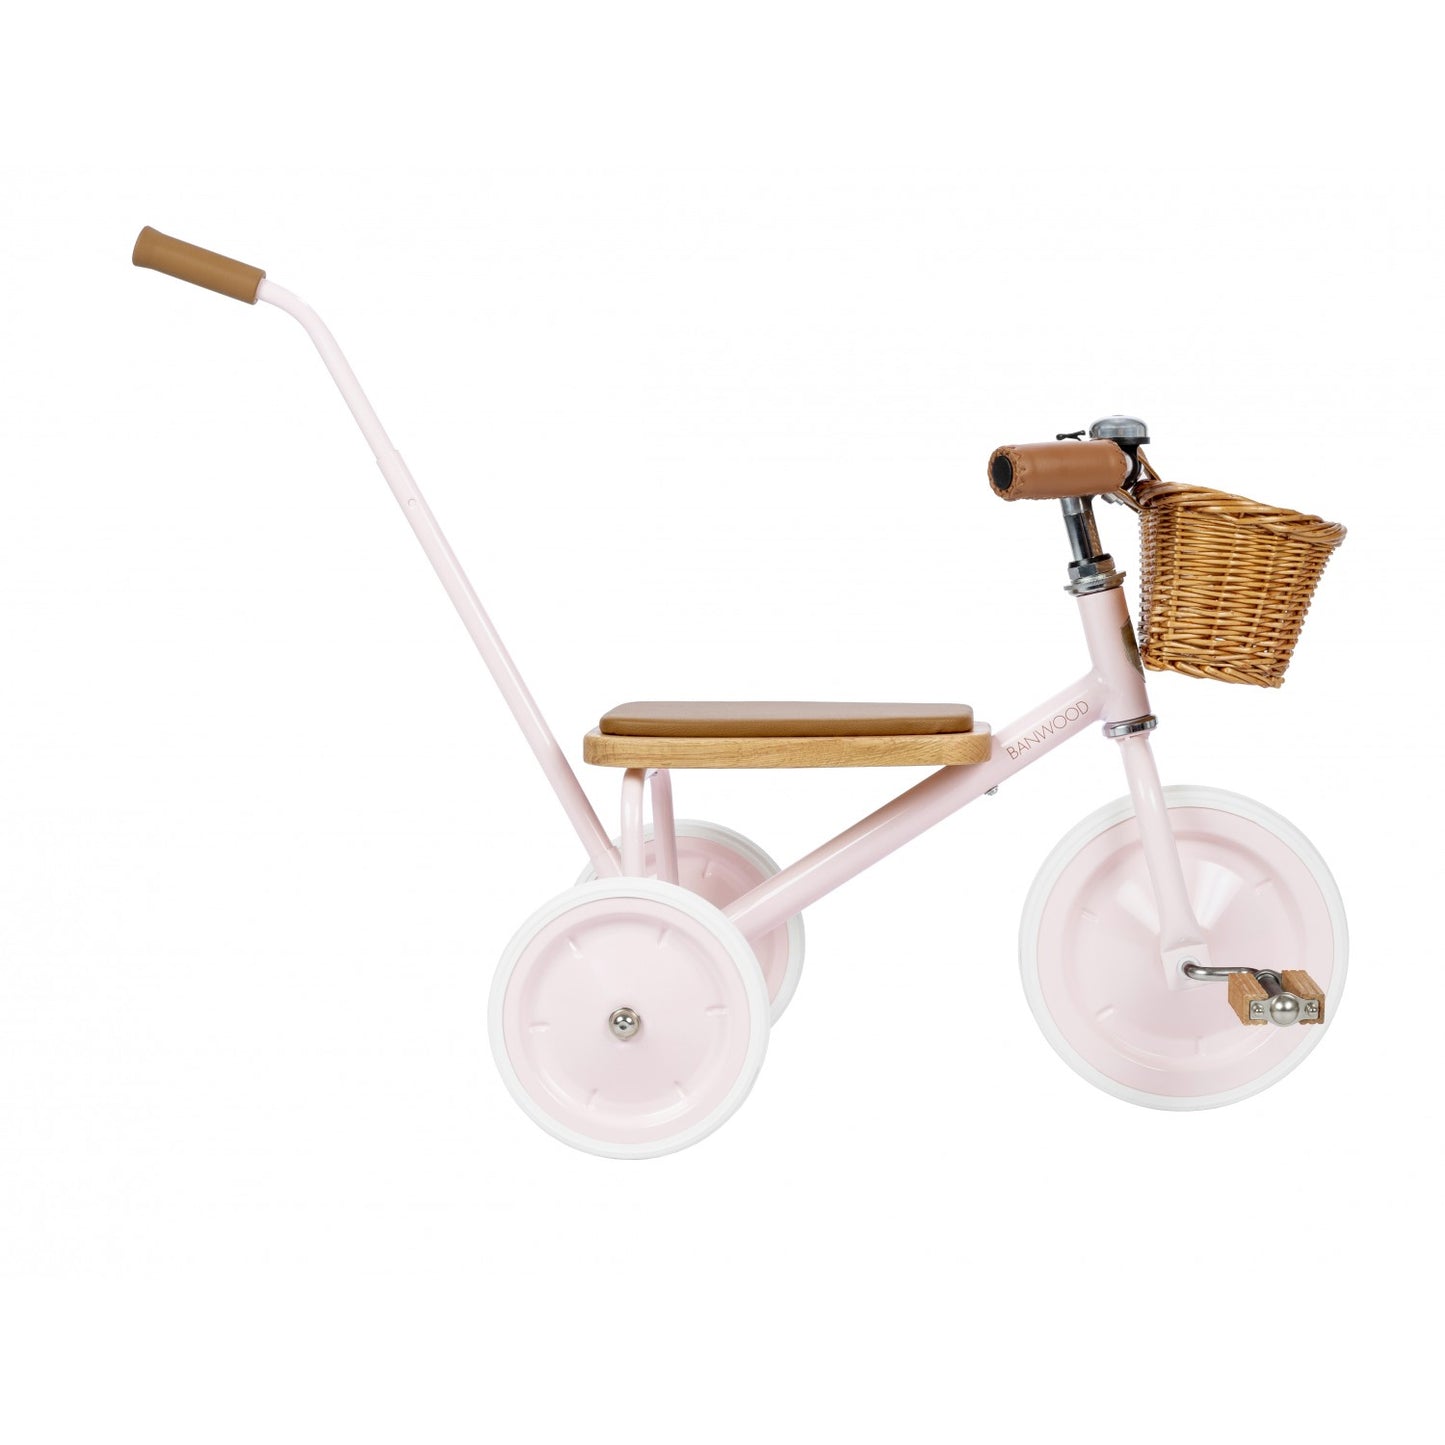 Load image into Gallery viewer, Pink Vintage Trike with Basket
